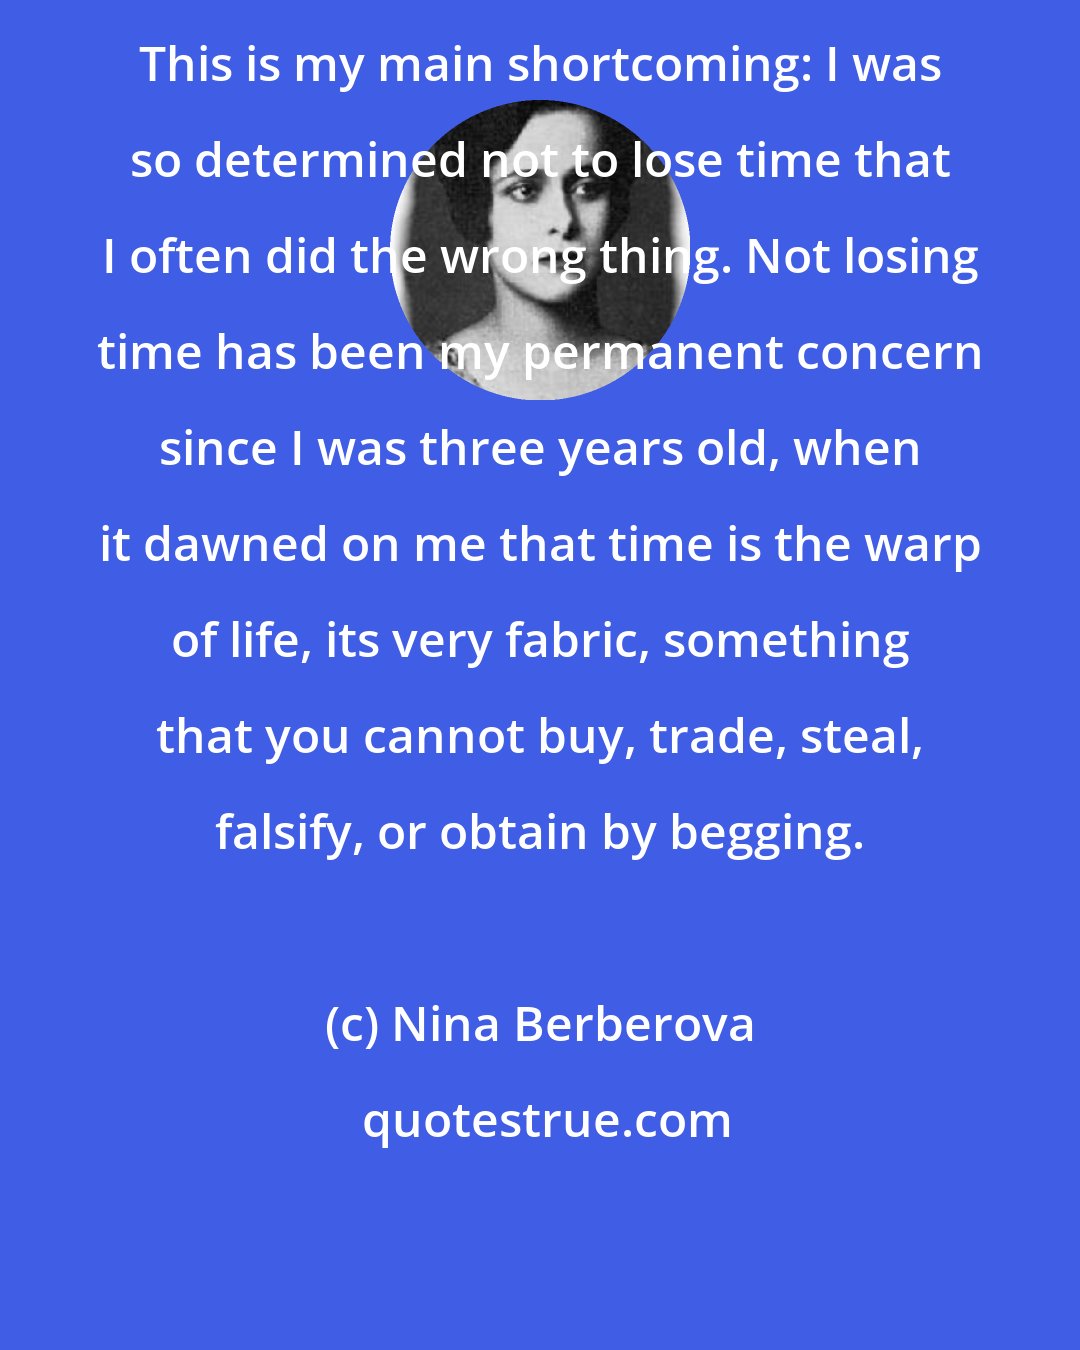 Nina Berberova: This is my main shortcoming: I was so determined not to lose time that I often did the wrong thing. Not losing time has been my permanent concern since I was three years old, when it dawned on me that time is the warp of life, its very fabric, something that you cannot buy, trade, steal, falsify, or obtain by begging.